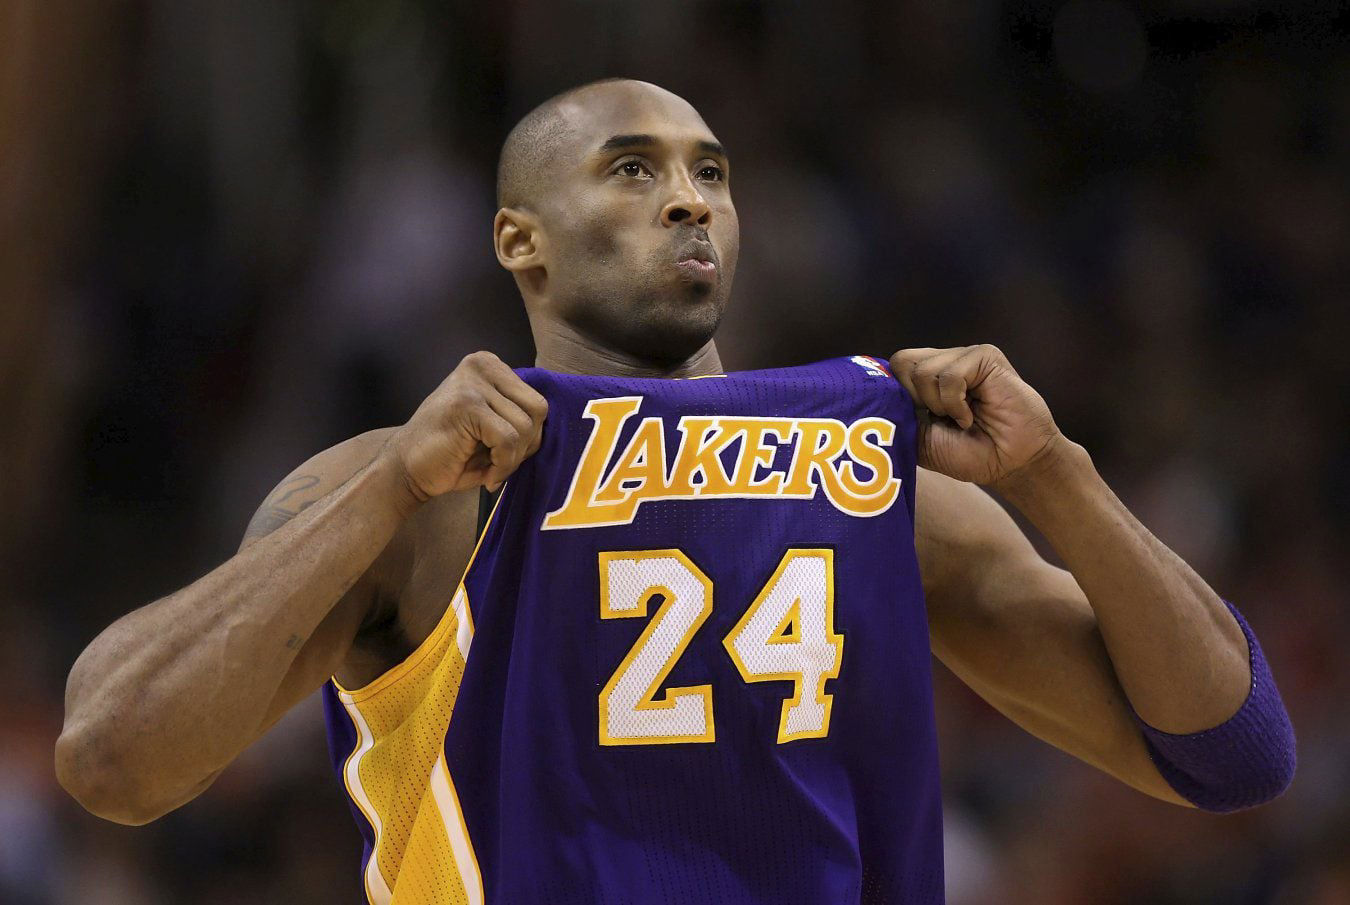 Kobe Bryant’s career in the NBA: Stats, records and seasons played